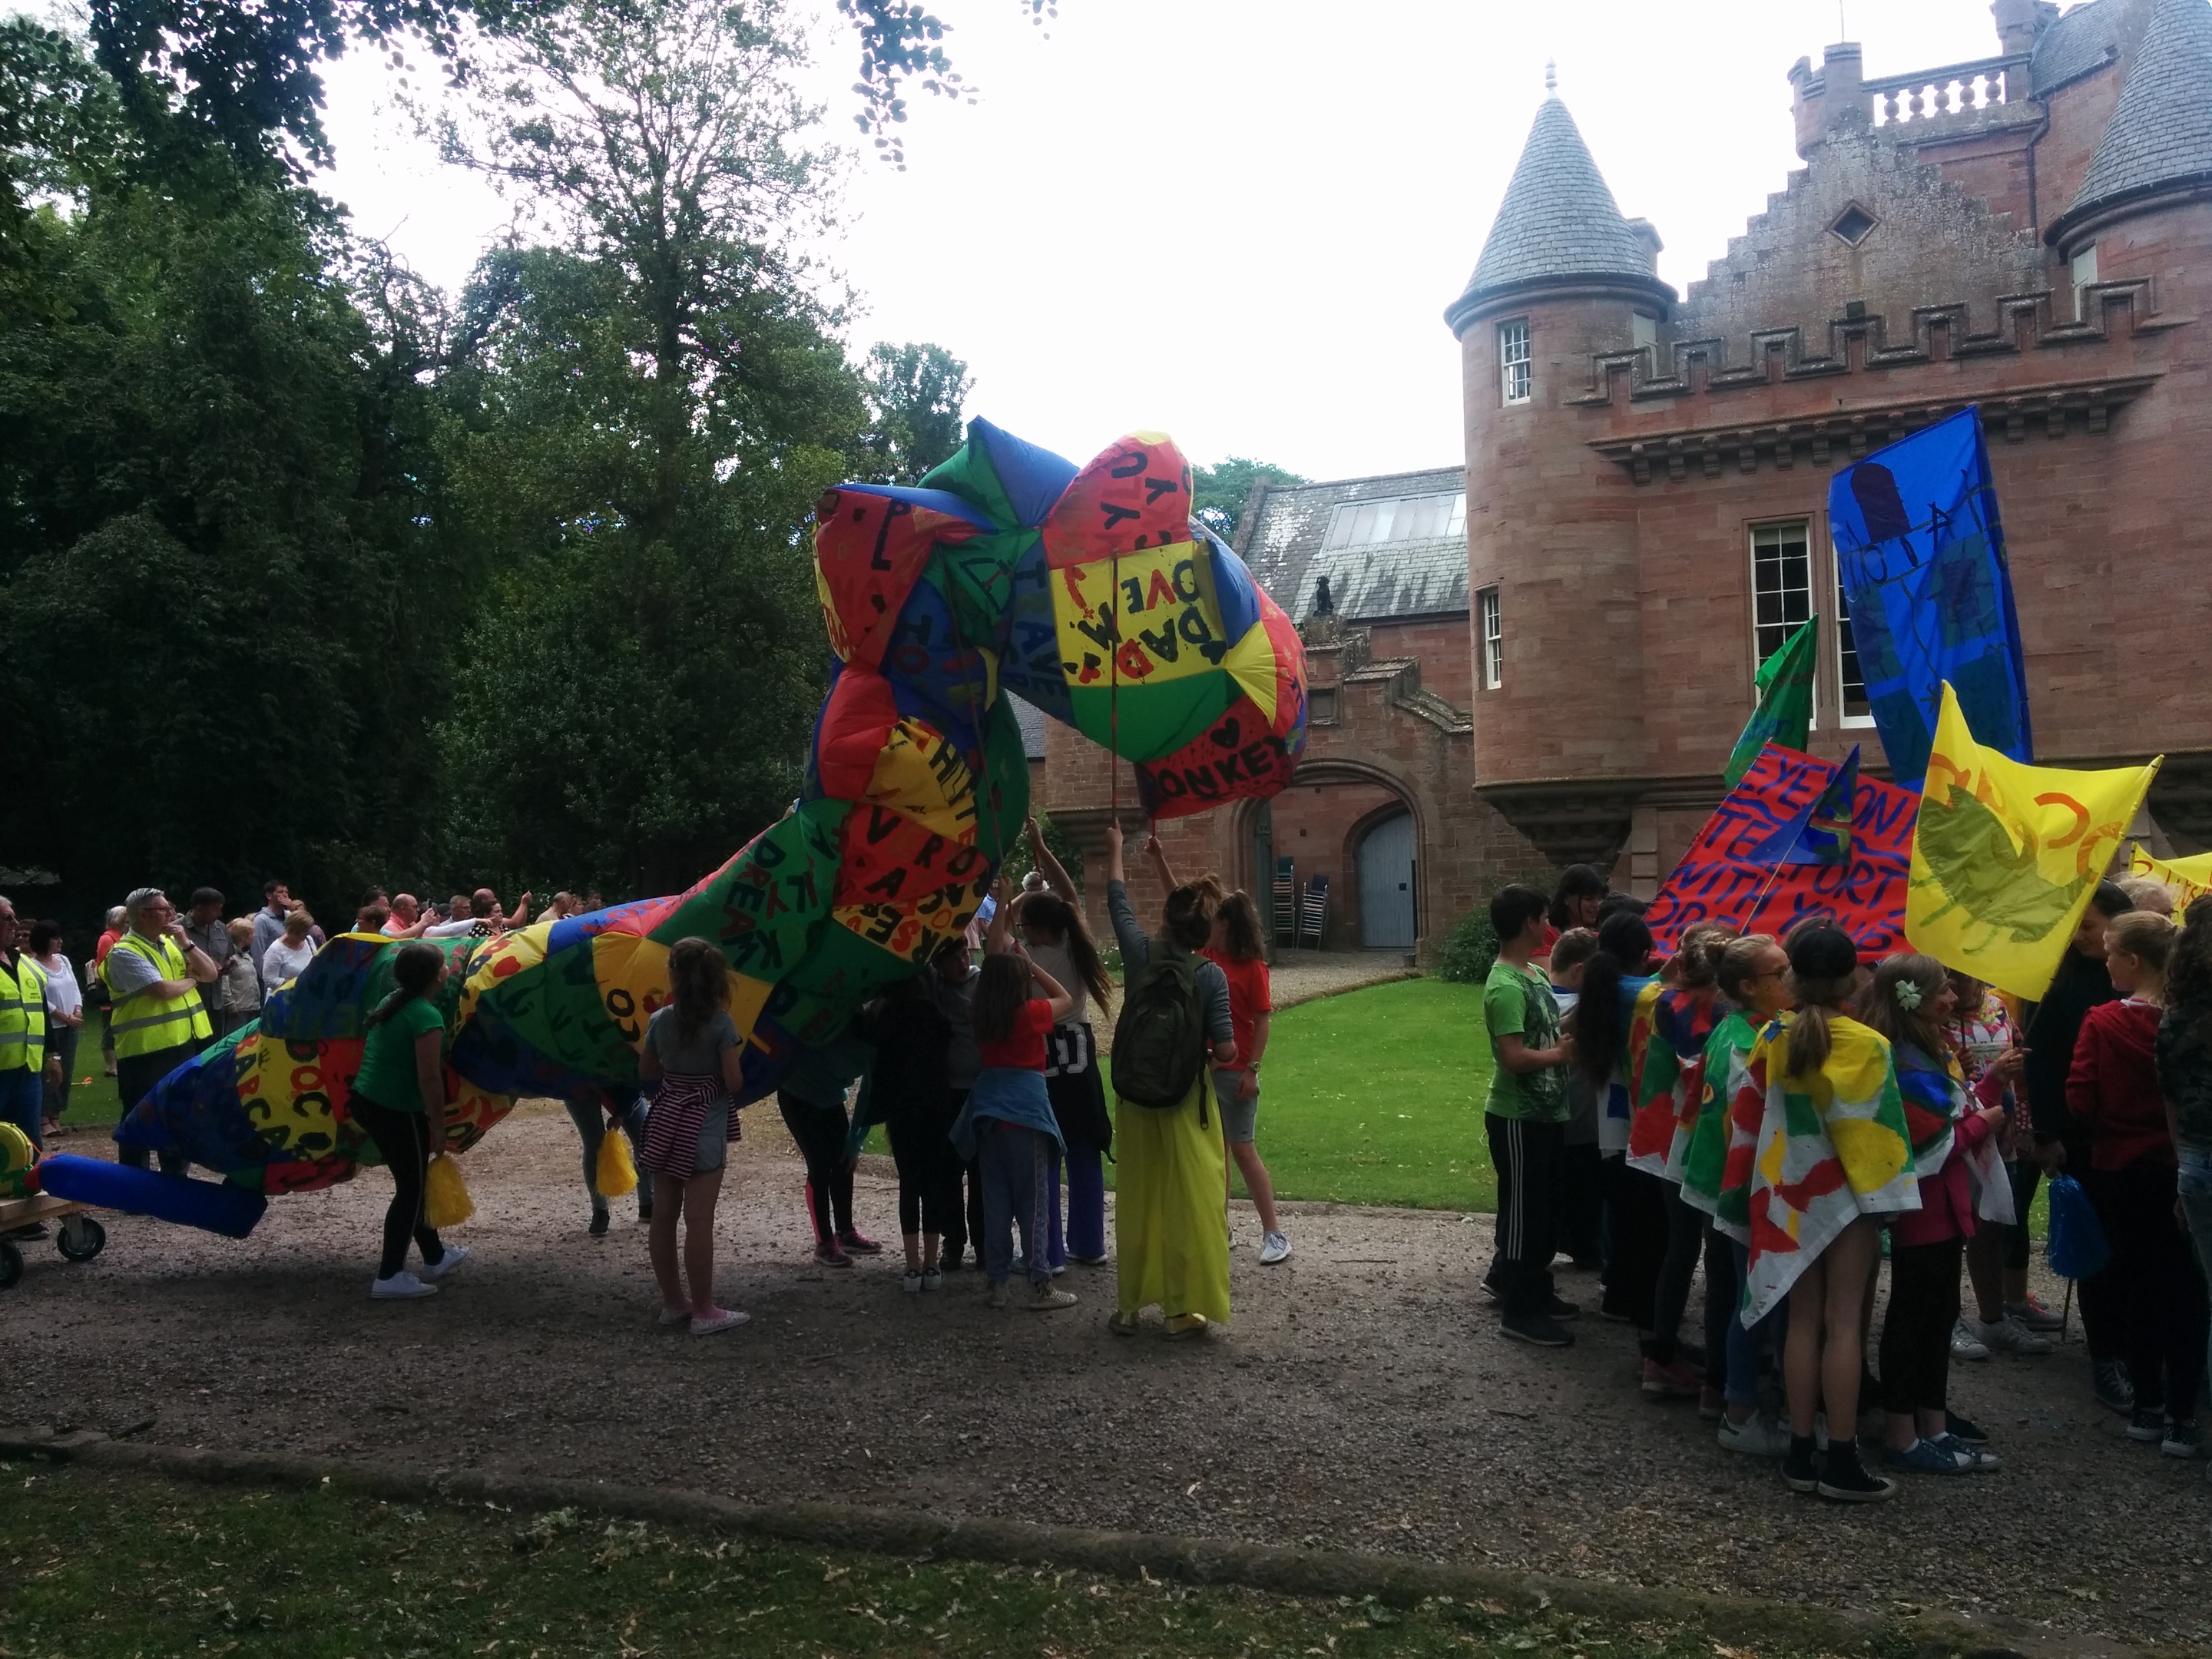 The procession at Hospitalfield House.